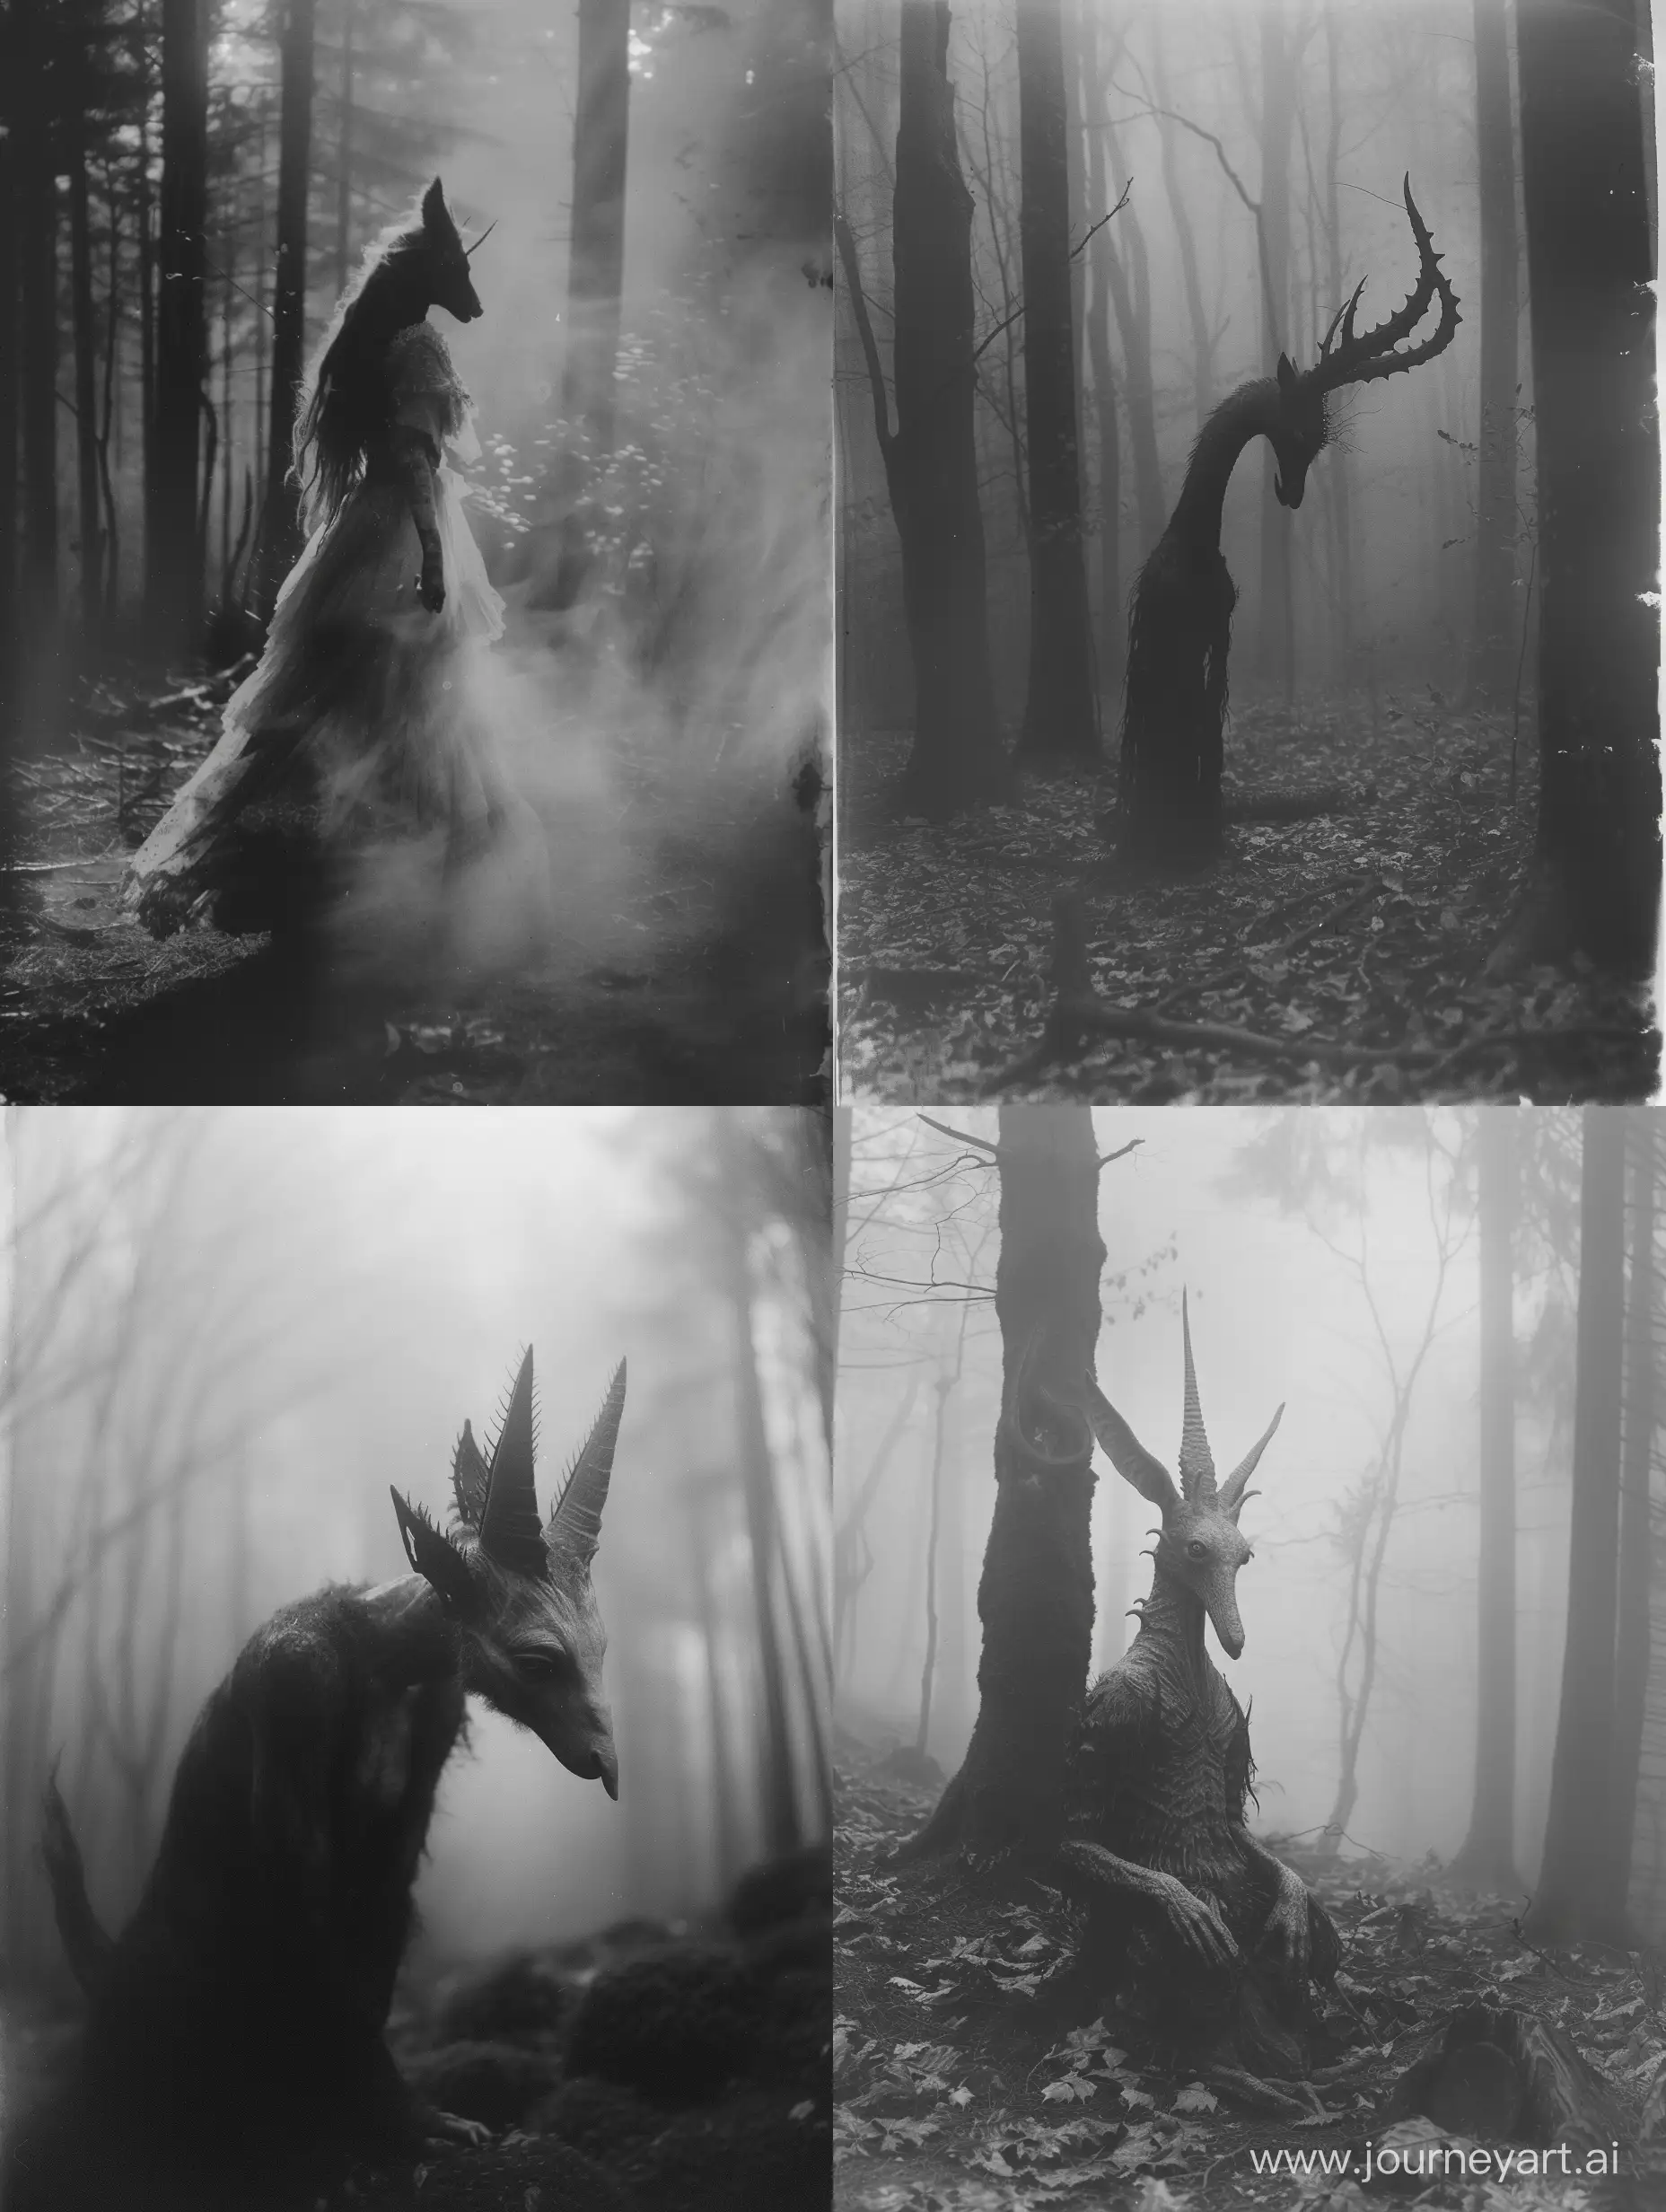 a hauntingly beautiful creature, half-human and half-beast, foggy Forrest, Sinister Awakening, Supernatural Dread, Fey Enigma, Beastly Intrigue, Caged Mysterium, Kenneth anger, lovecraft, Nona limmen, William Mortensen, grayscale, horror core, dark aesthetic, expired 35mm film